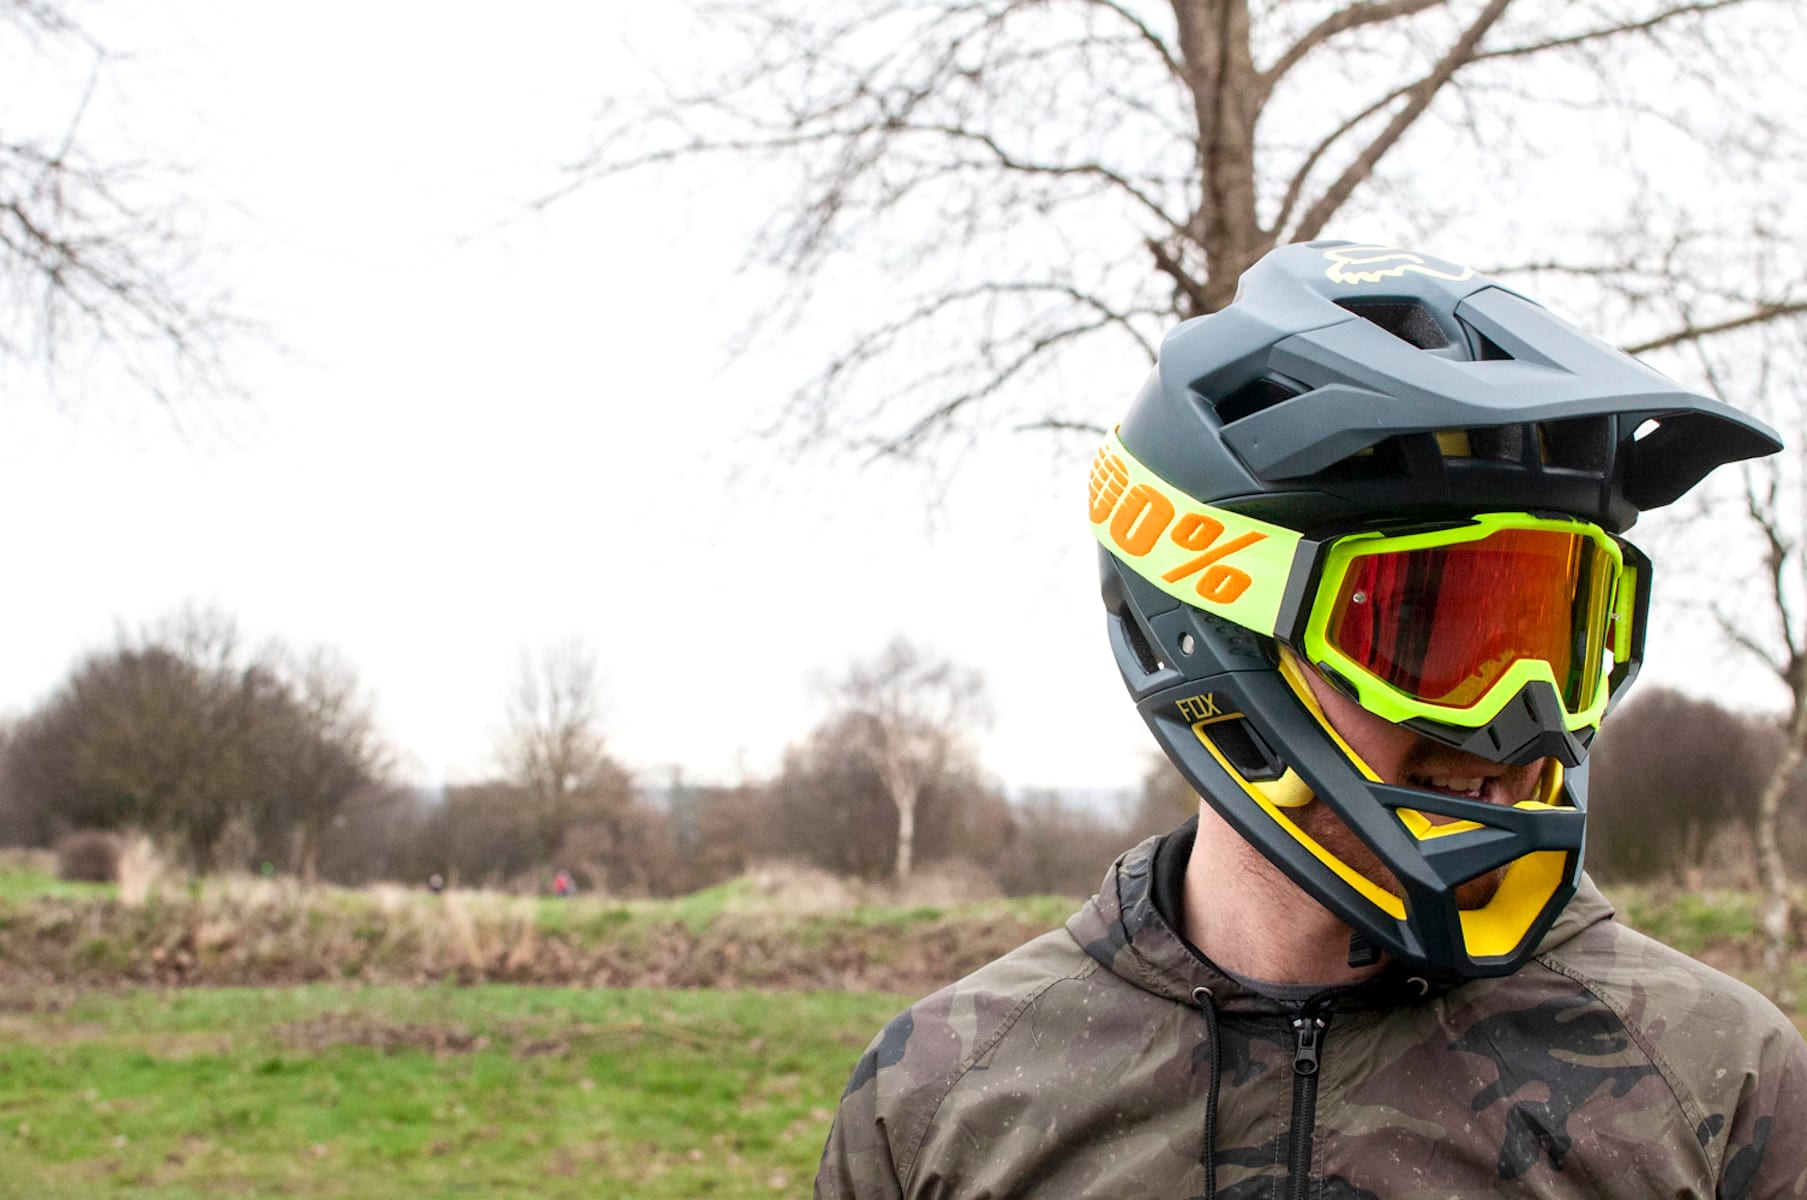 Used to failure updated Review: 100% Racecraft MX Goggles – mtbboy1993